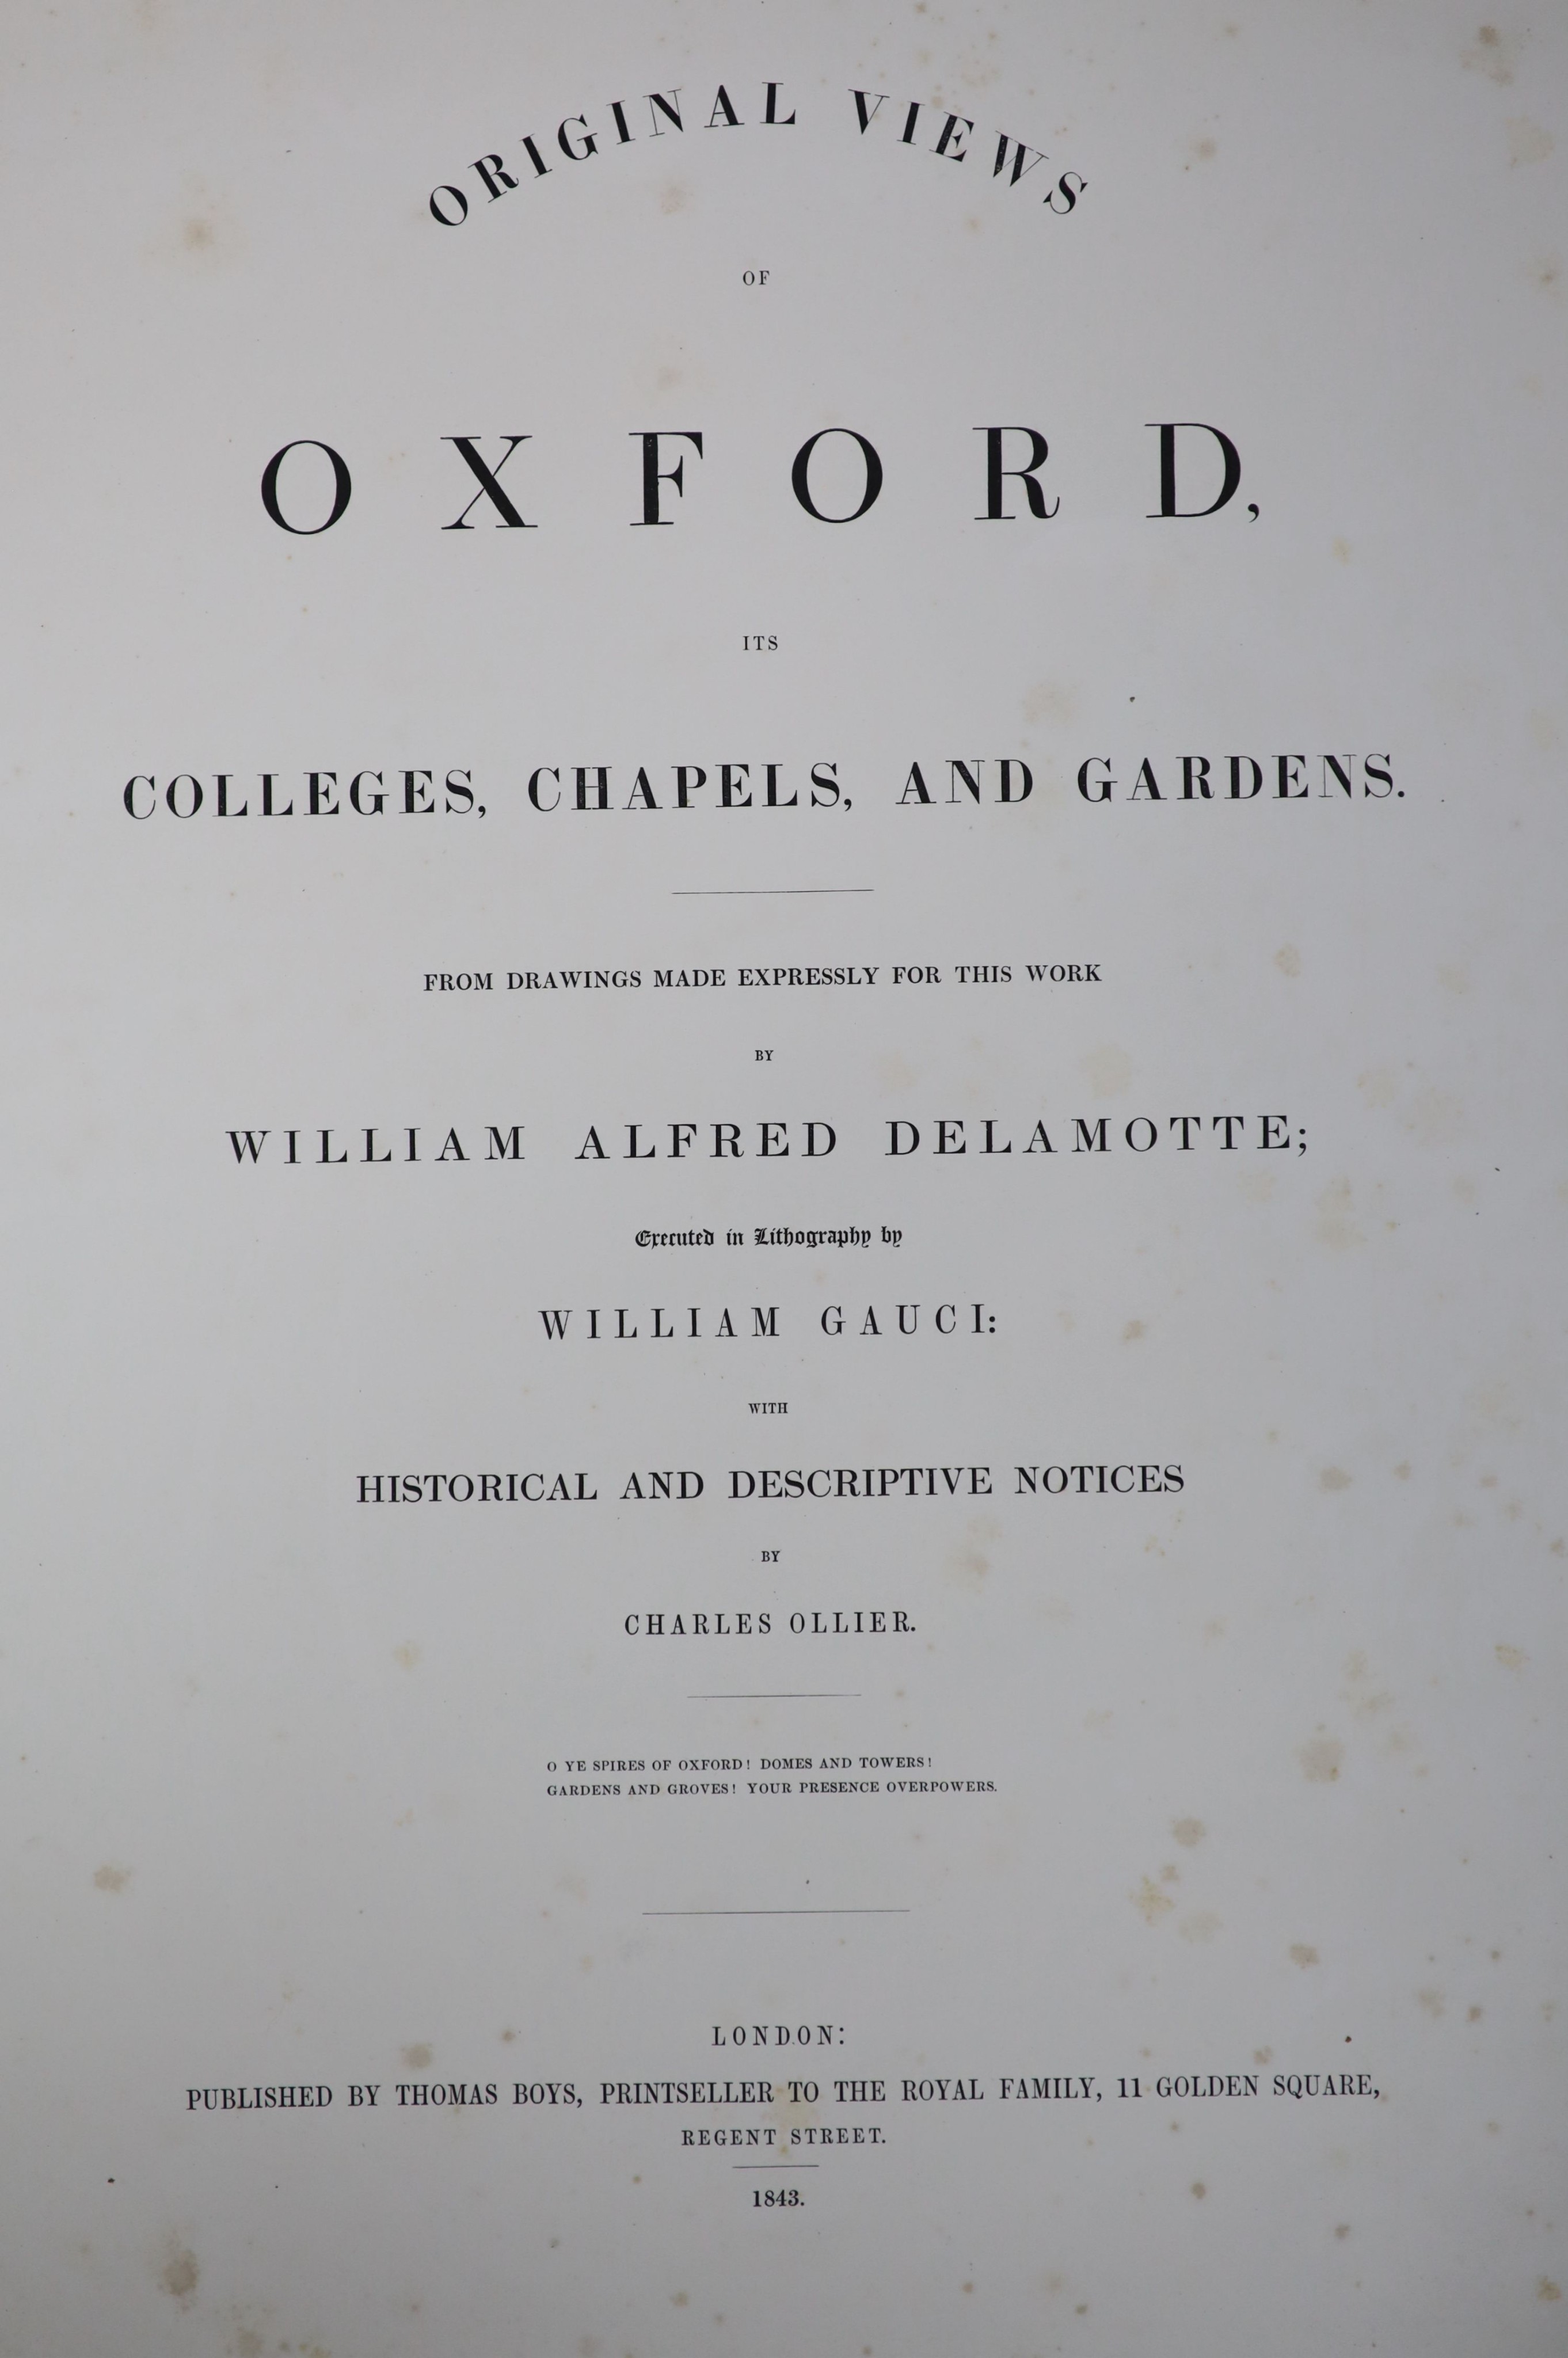 Delamotte, William Alfred - Original Views of Oxford, its Colleges, Chapels....folio, with coloured title and 25 litho plates, disbound, London, 1843